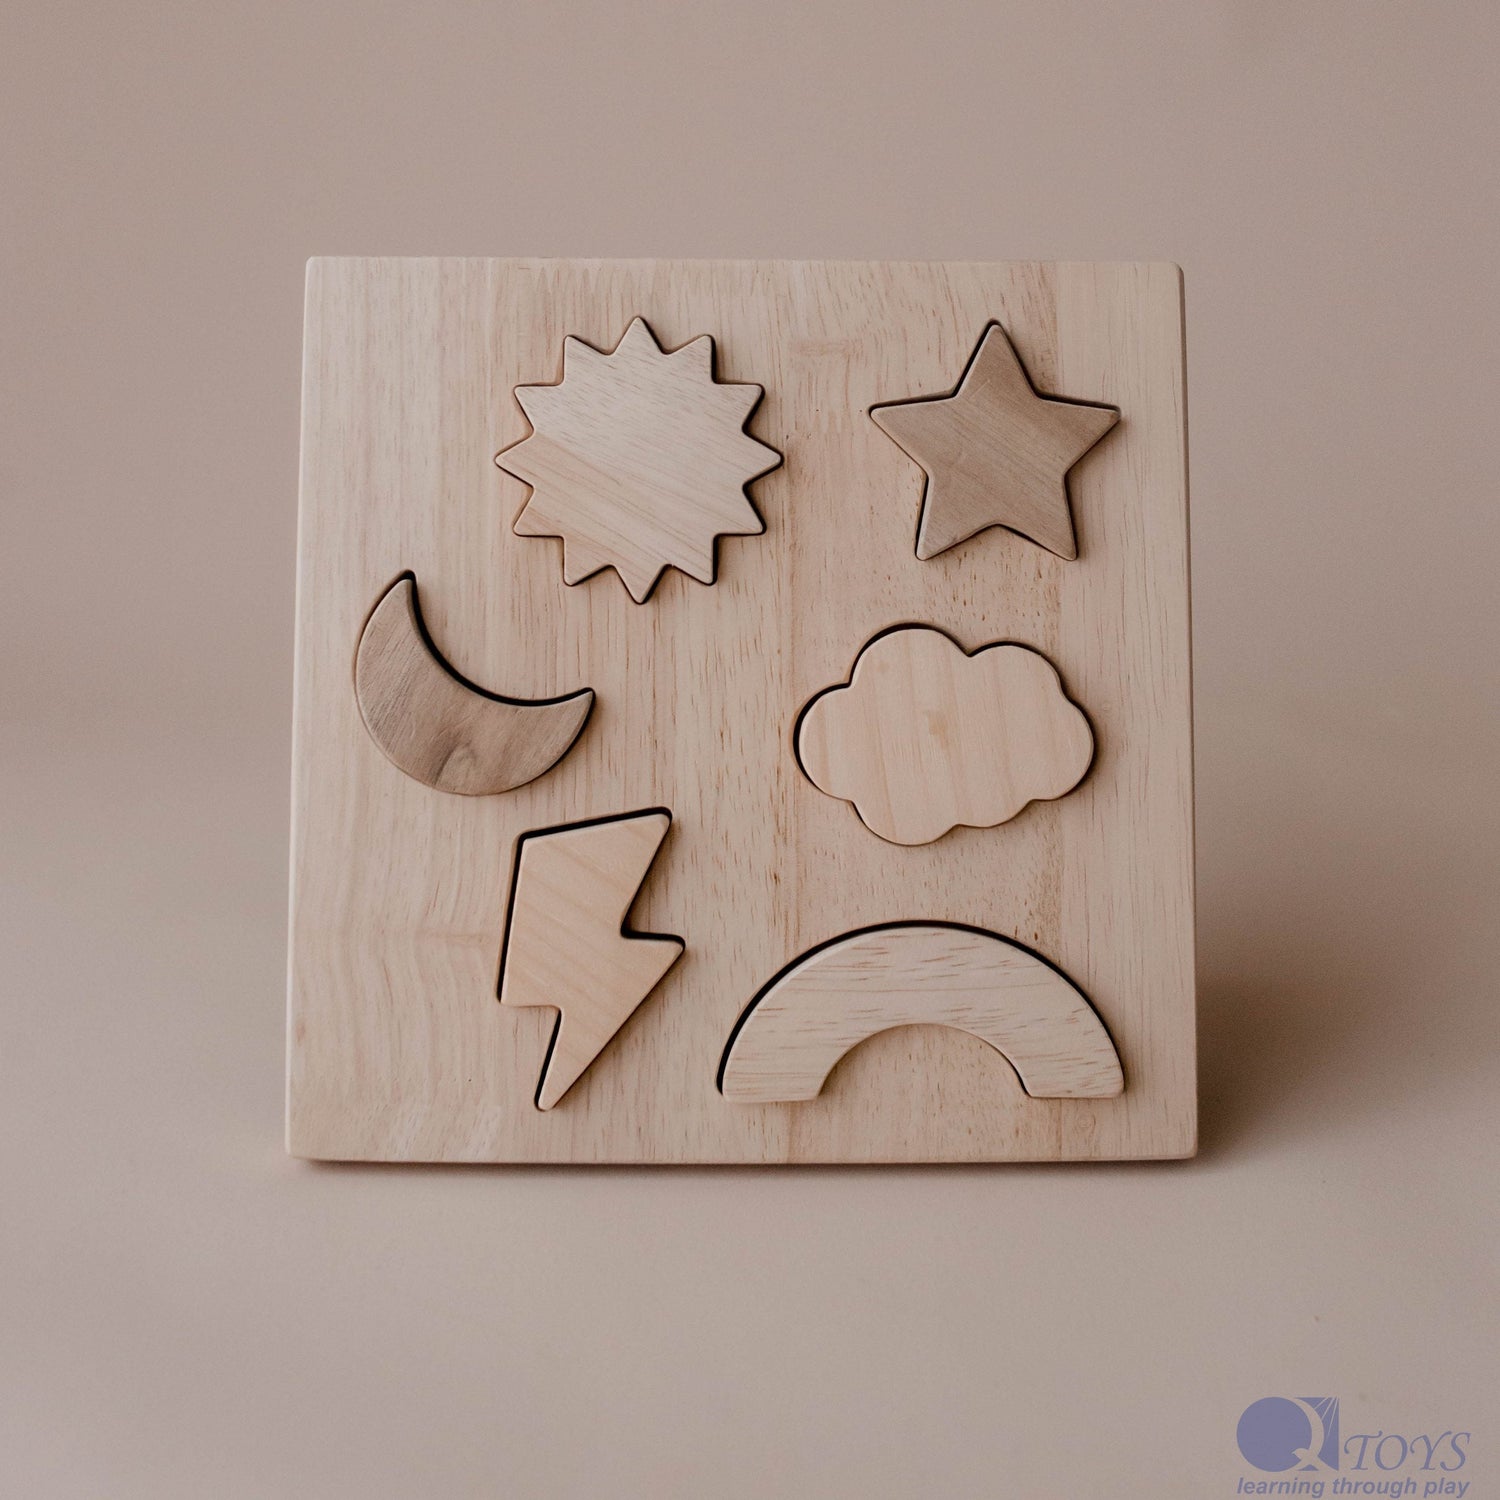 WEATHER SYMBOL PUZZLE *PRE-ORDER* by QTOYS - The Playful Collective